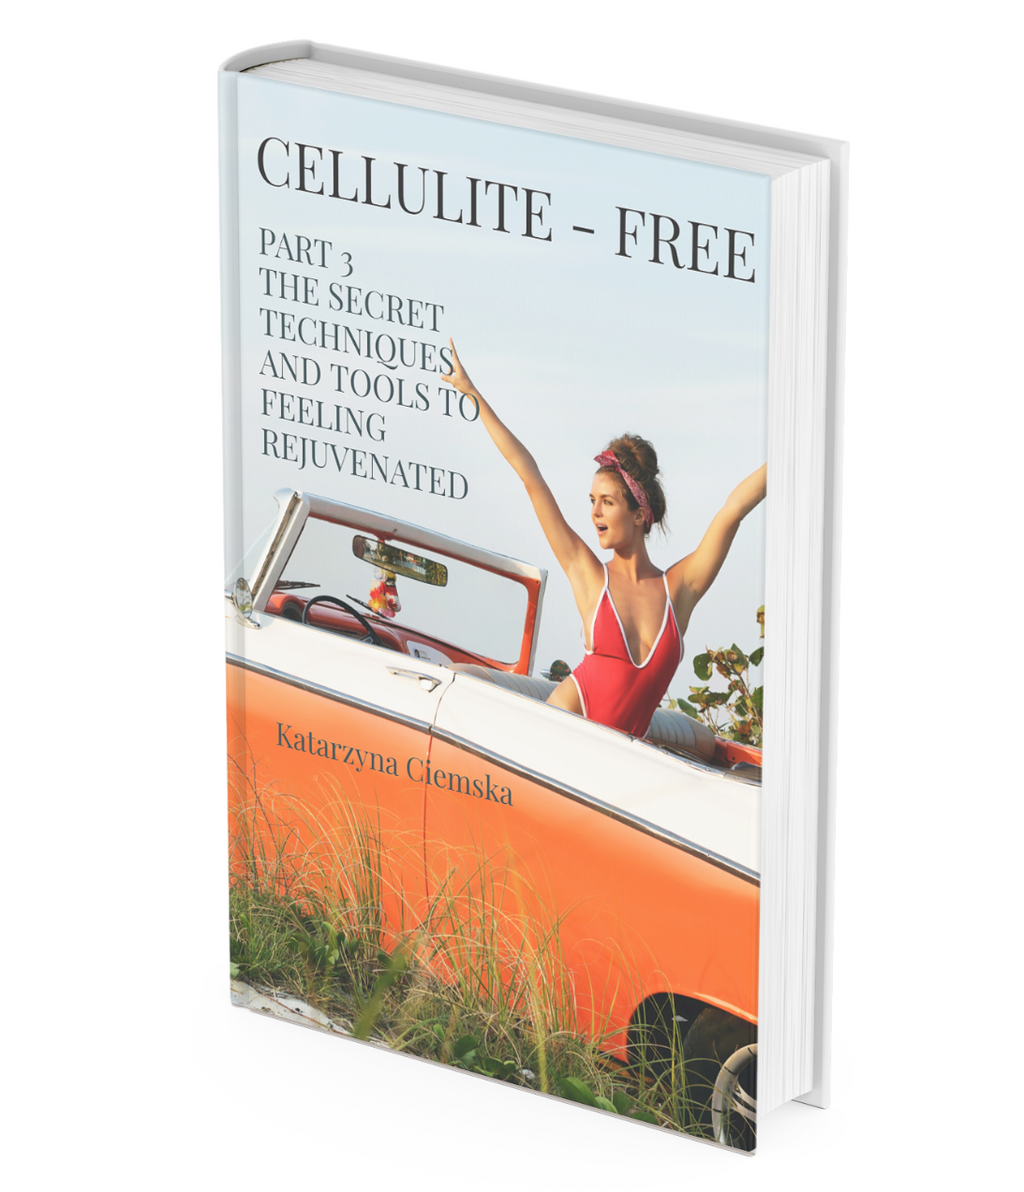 CELLULITE - FREE: PART 3 - THE SECRET TECHNIQUES AND TOOLS TO FEELING REJUVENATED